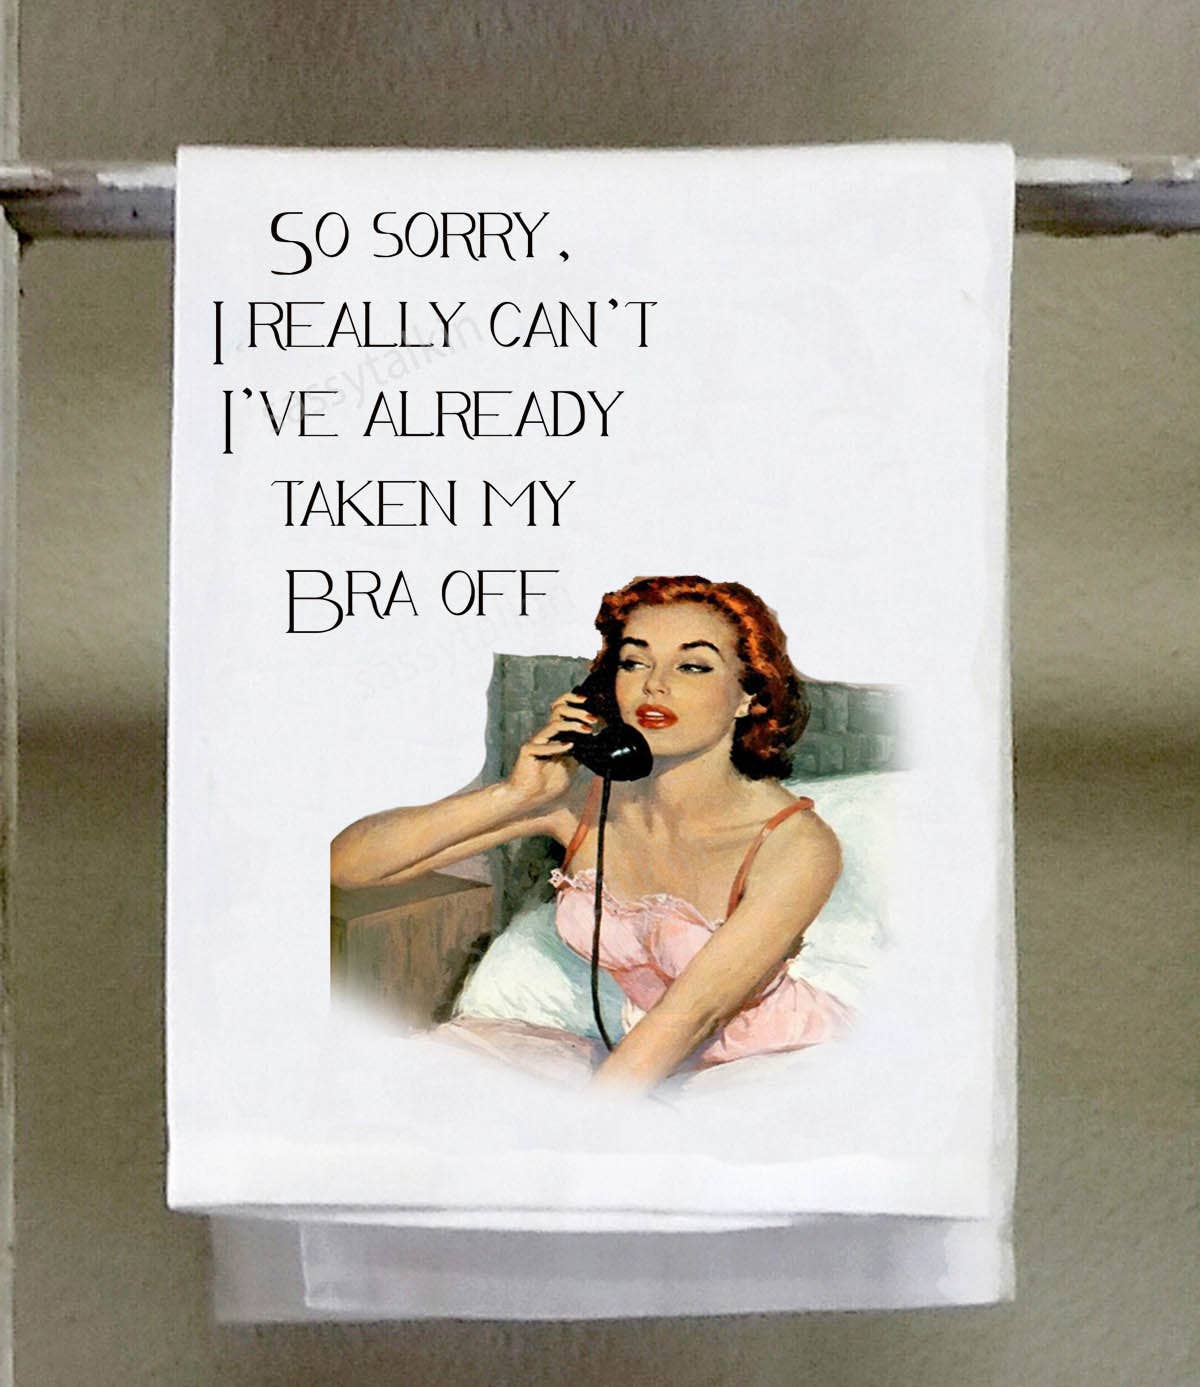 Sassy Girl, So sorry I really can't took my bra off - Vintage Image Towel